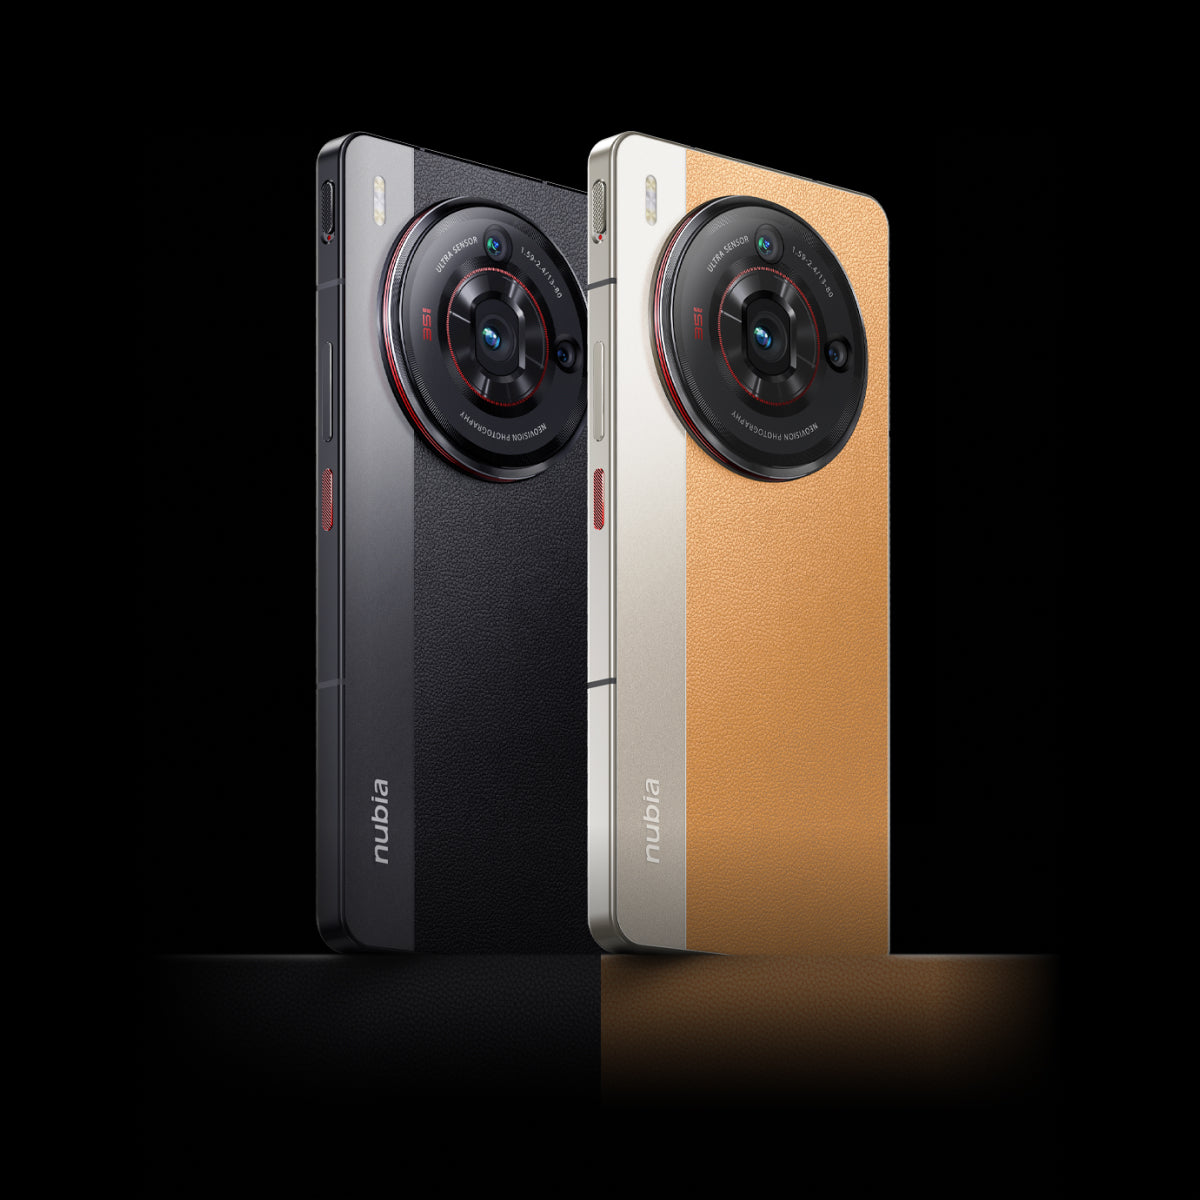 Nubia Z50S Pro Launched in China With 50MP Triple Cameras - Gizbot News